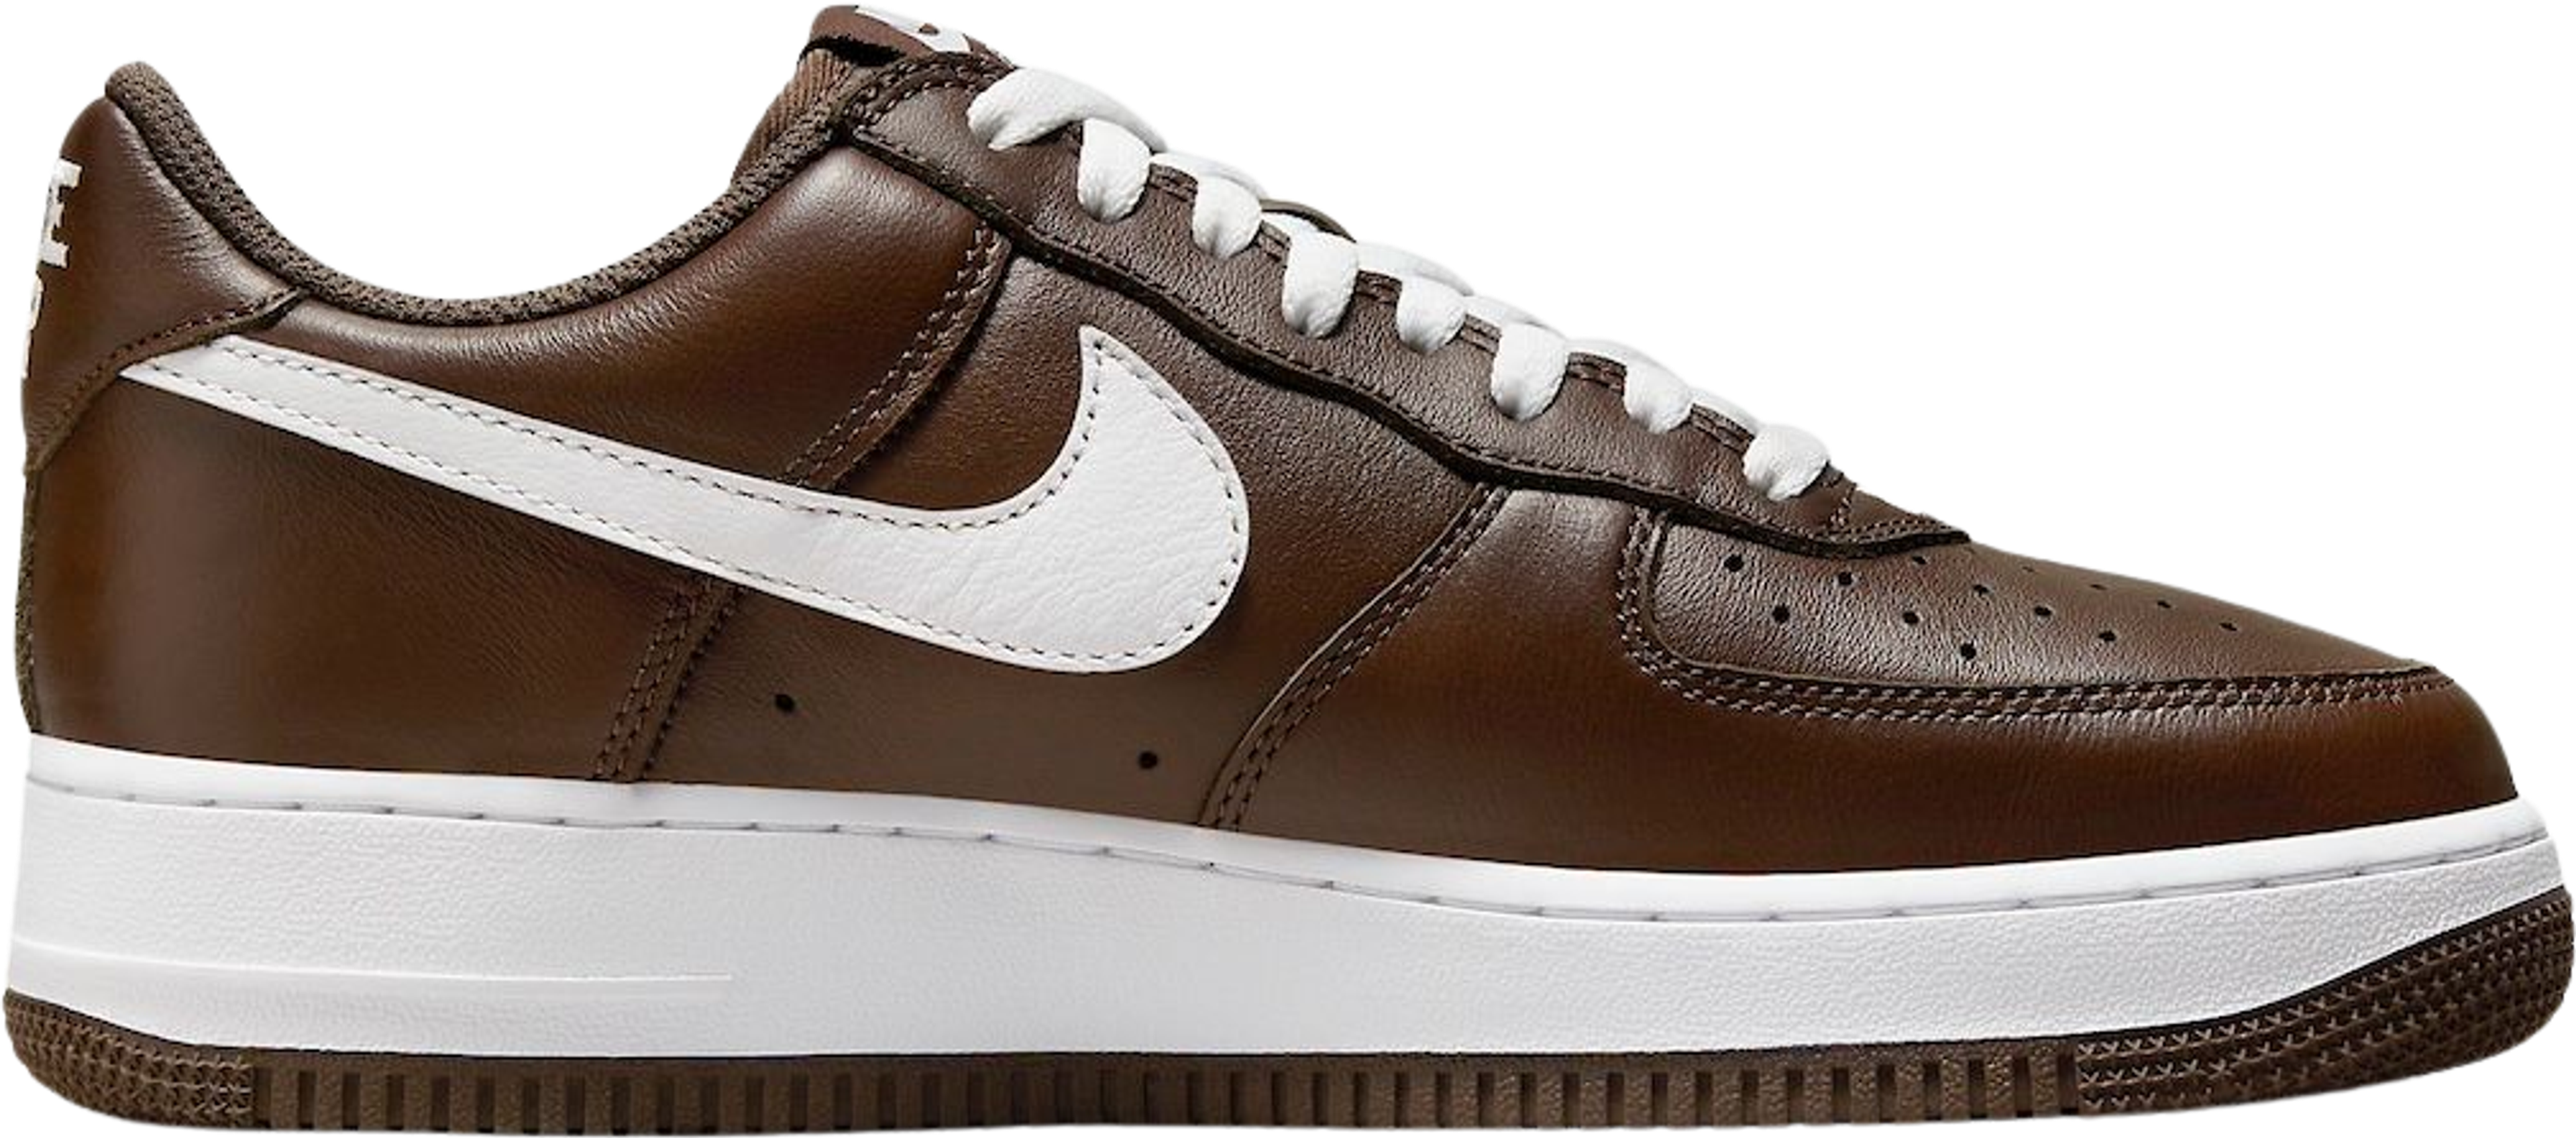 Nike Air Force 1 Low Color of the Month Chocolate | Release